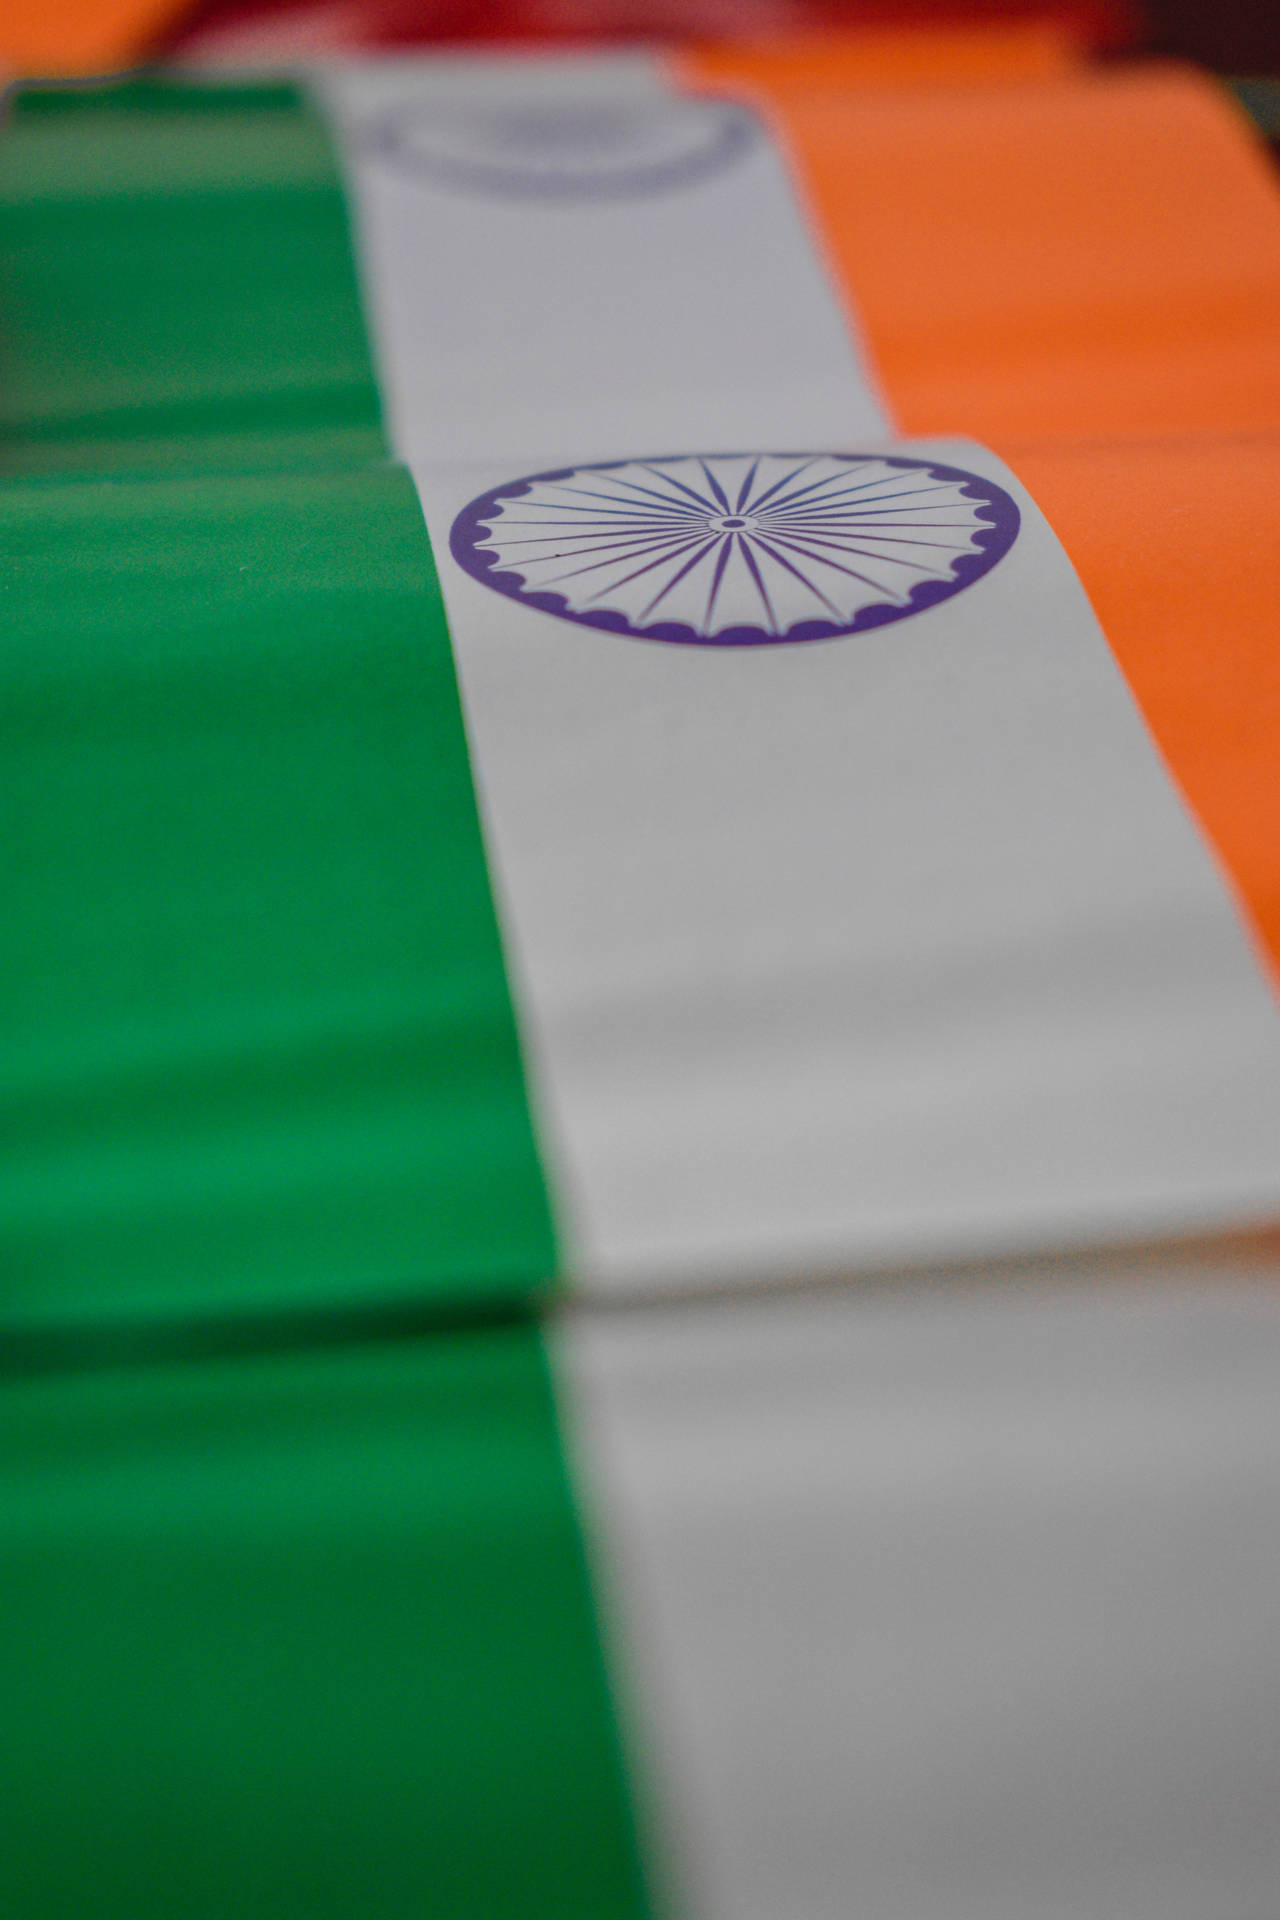 Triple Colours Of Indian Flag 4k Background